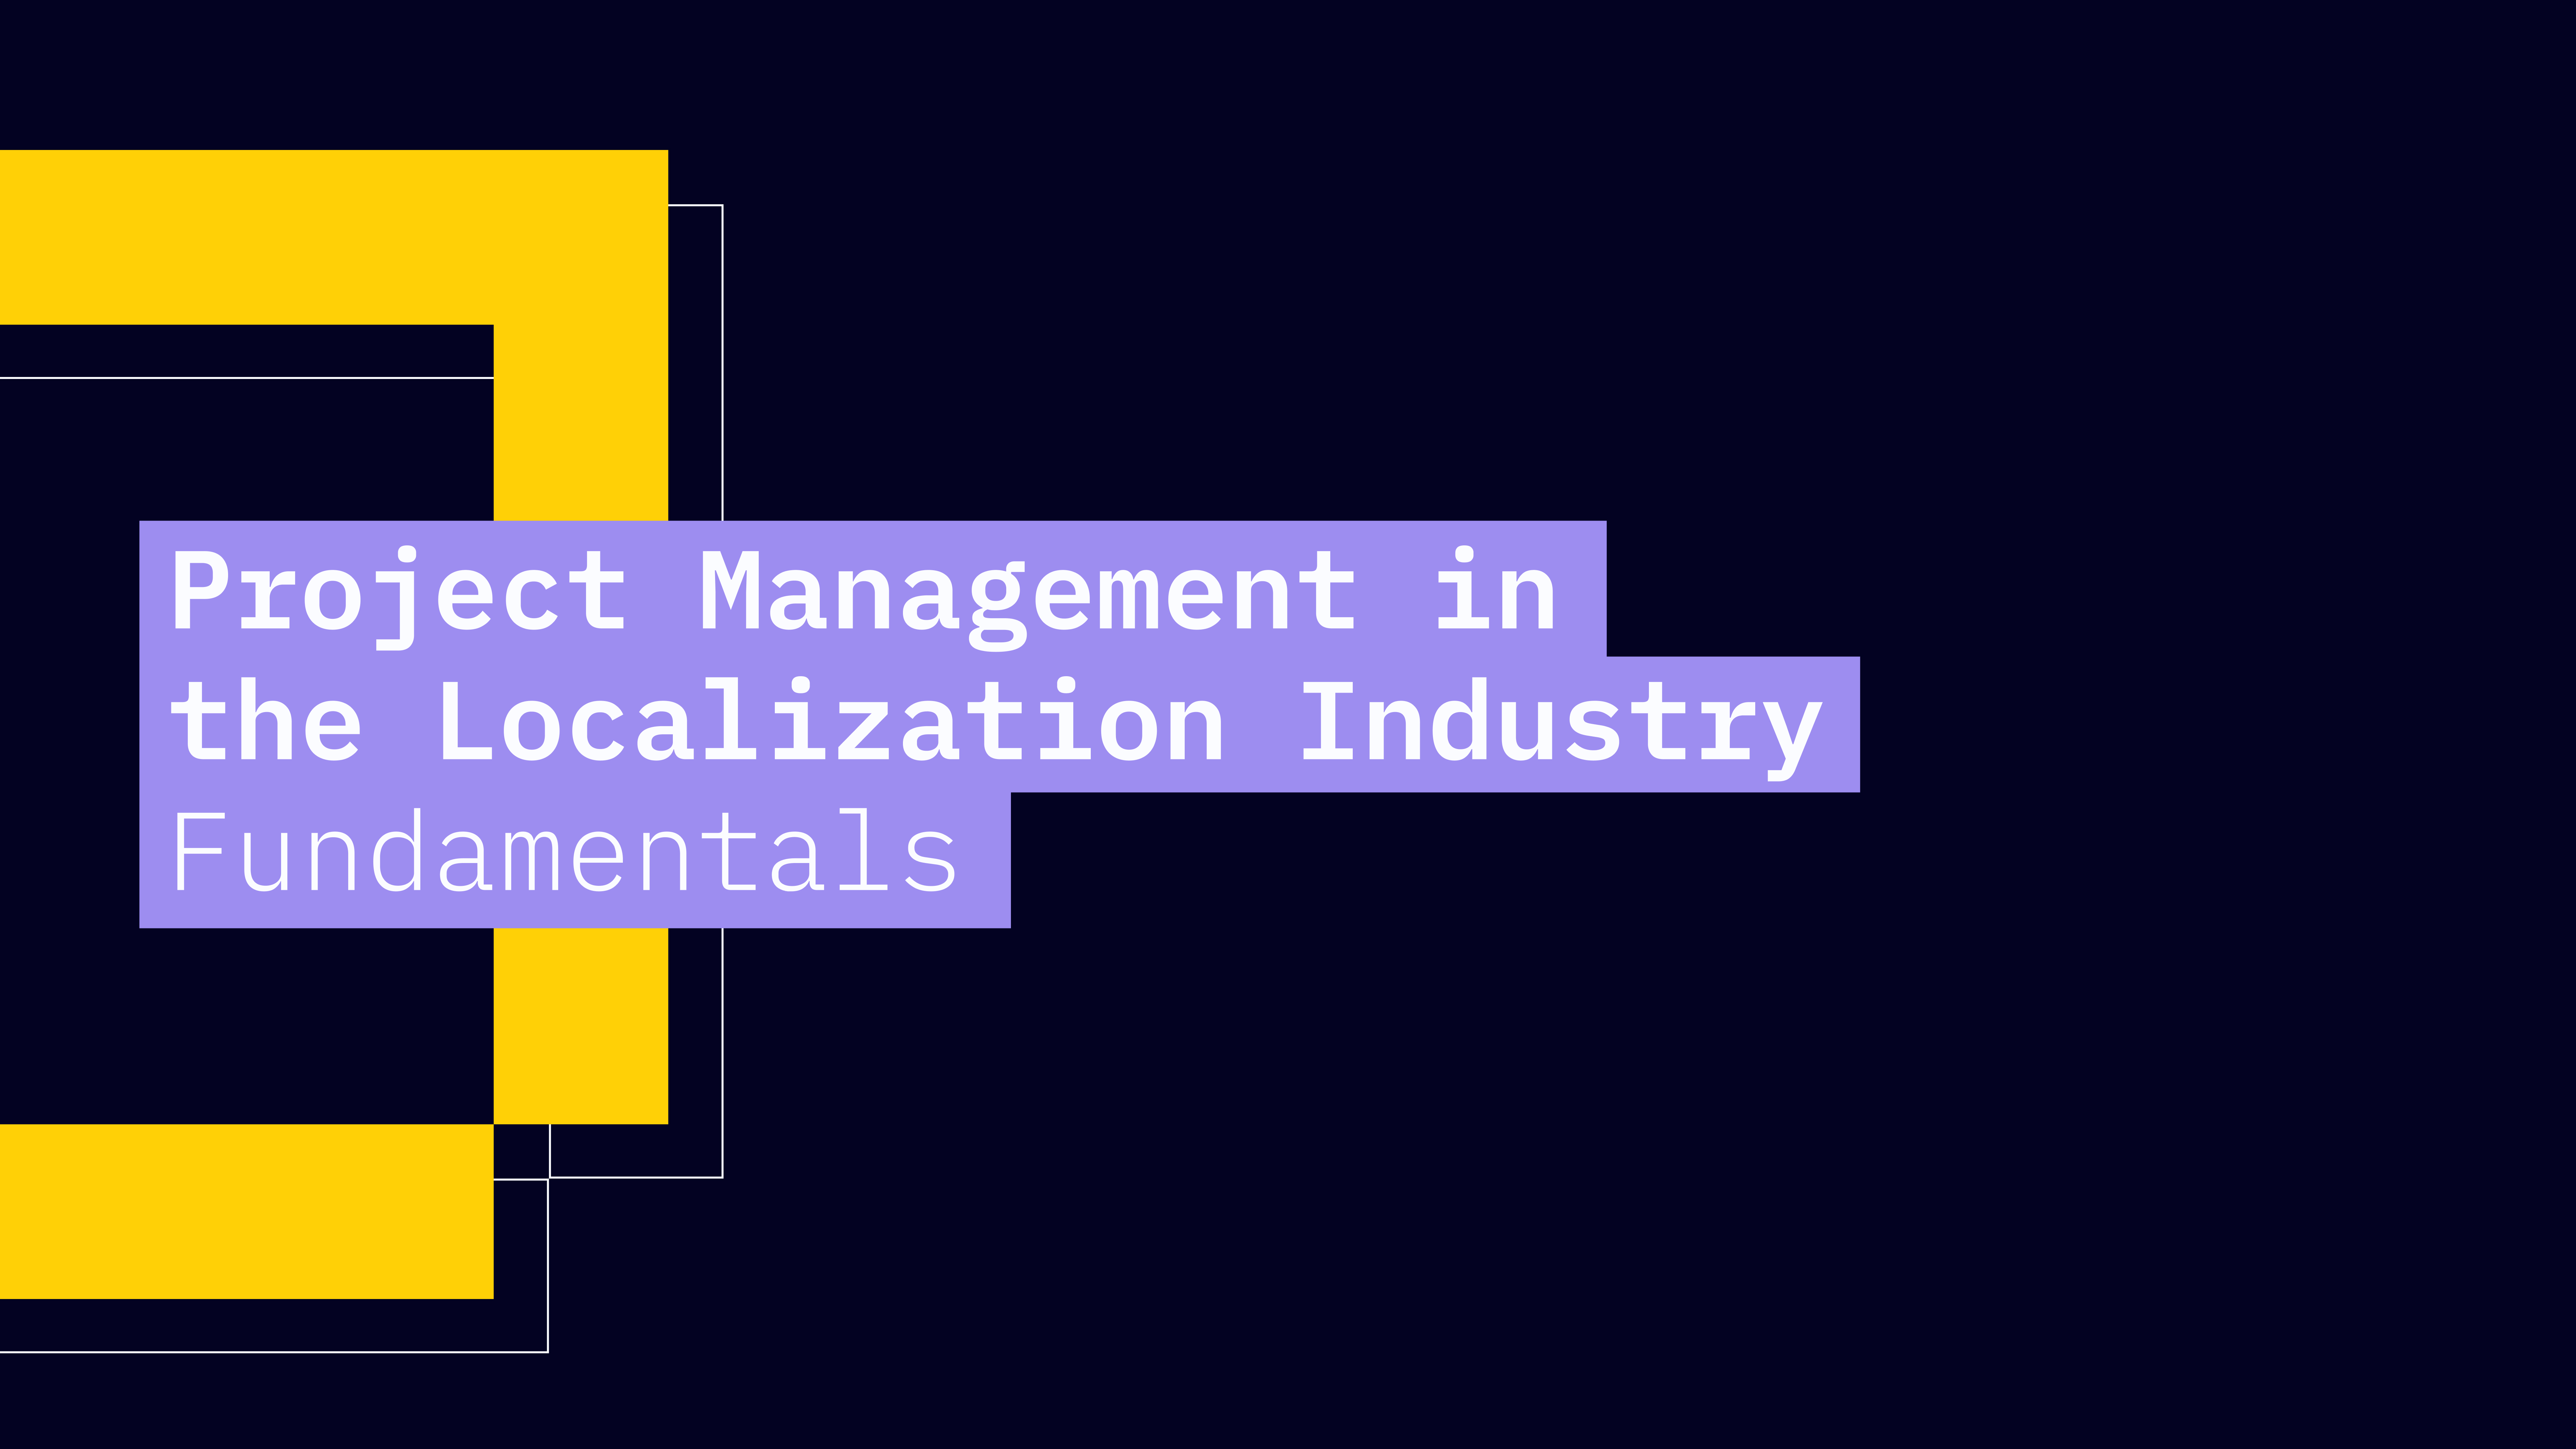 Project Management in the Localization Industry: Fundamentals